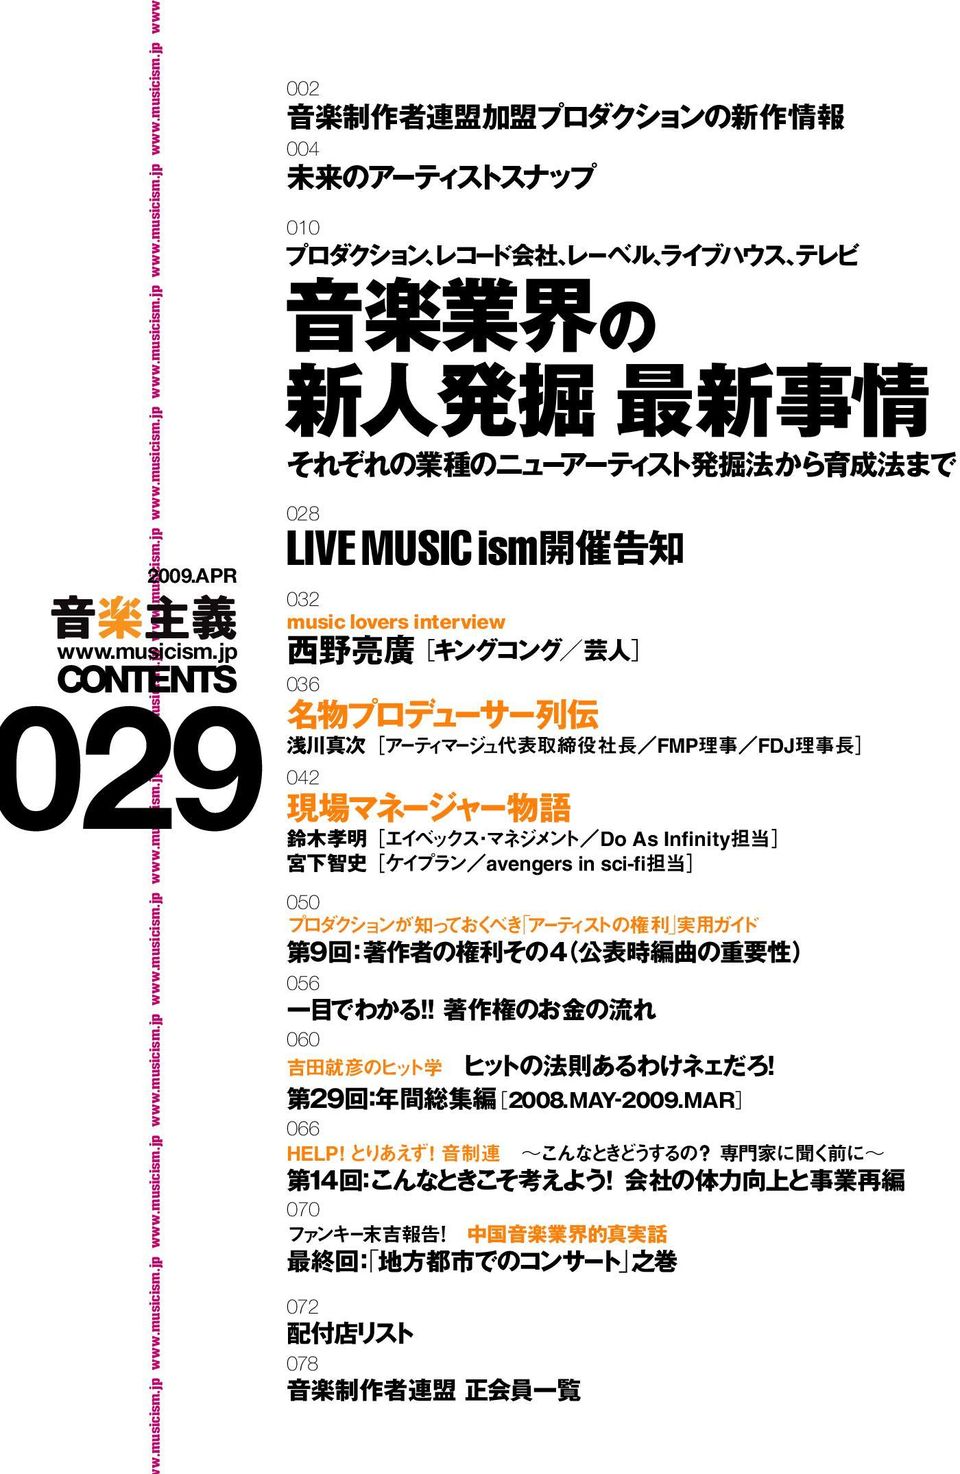 jp CONTENTS 29 002 004 010 028 LIVE MUSICism 032 music lovers interview 036 042